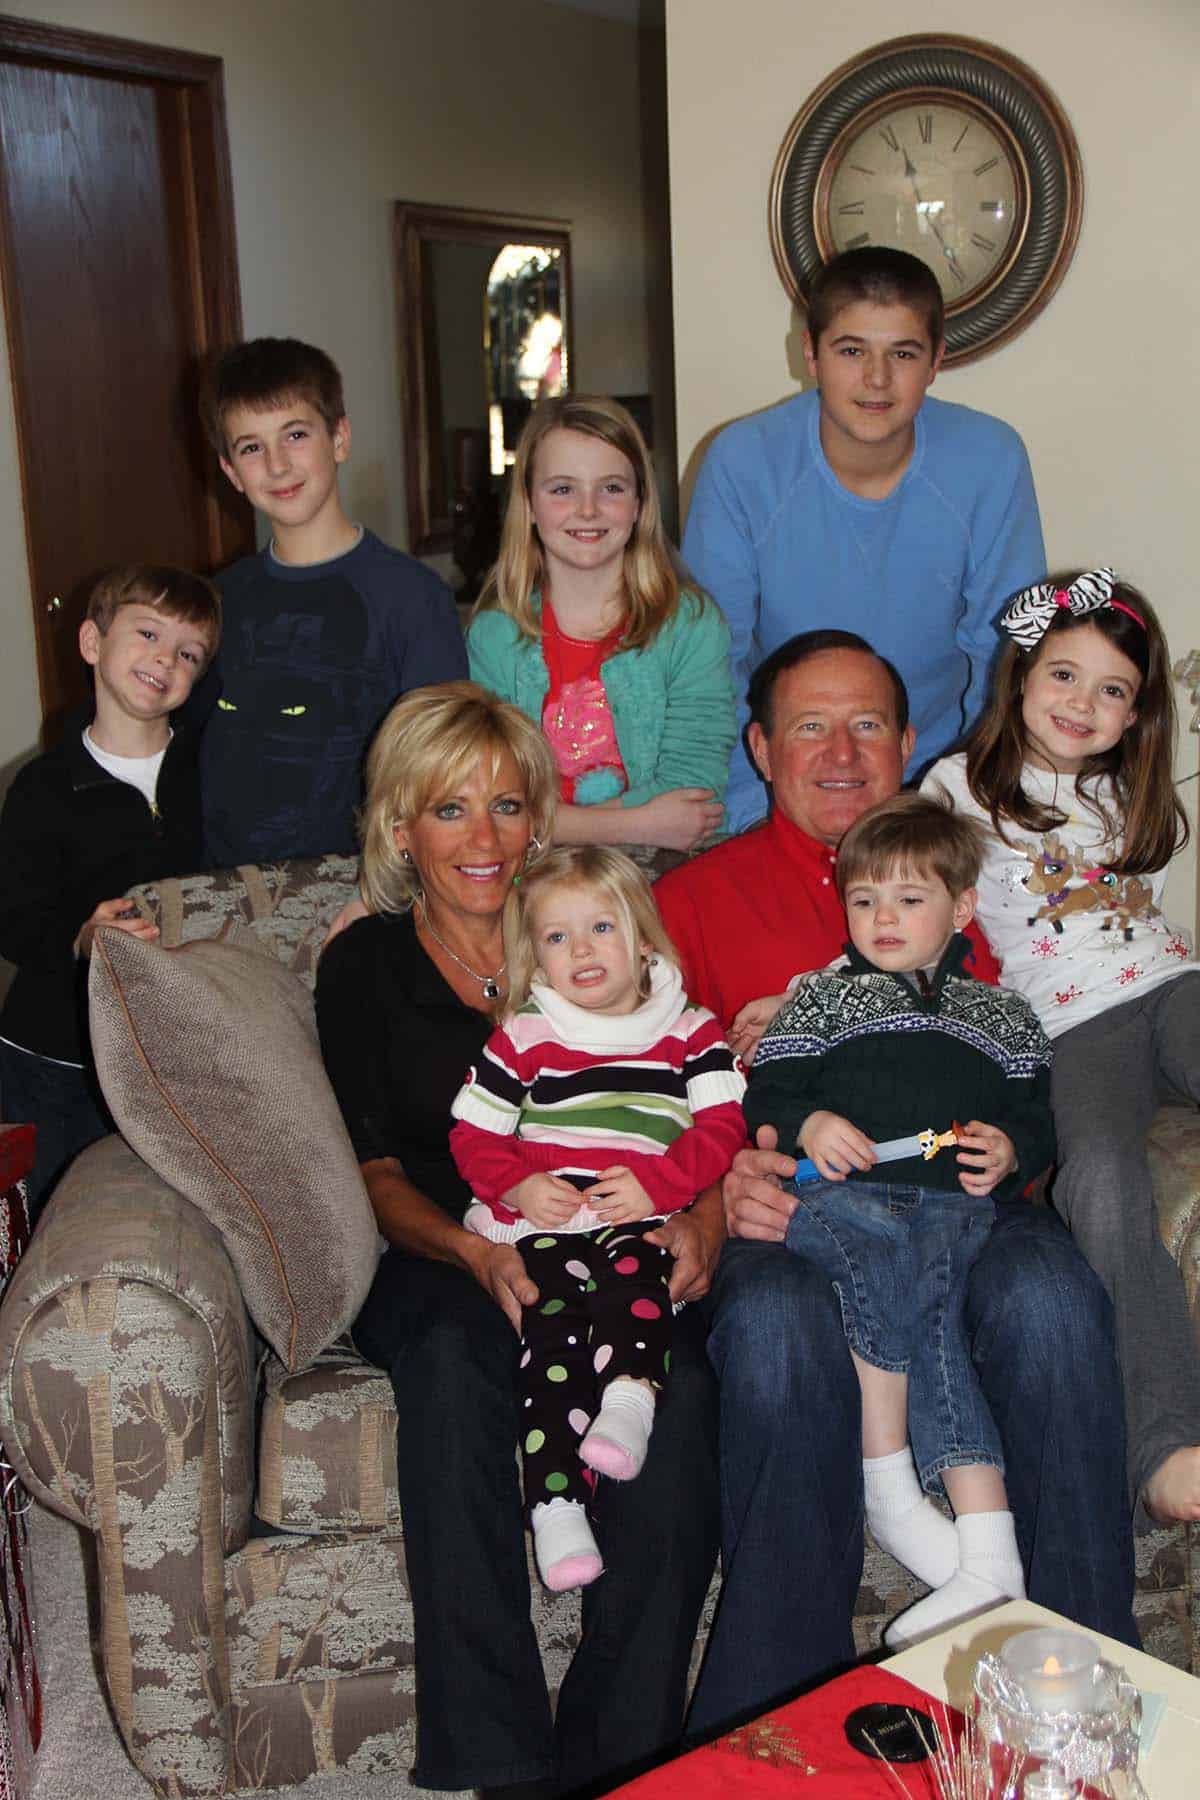 Joe and Robin with the grandkids.